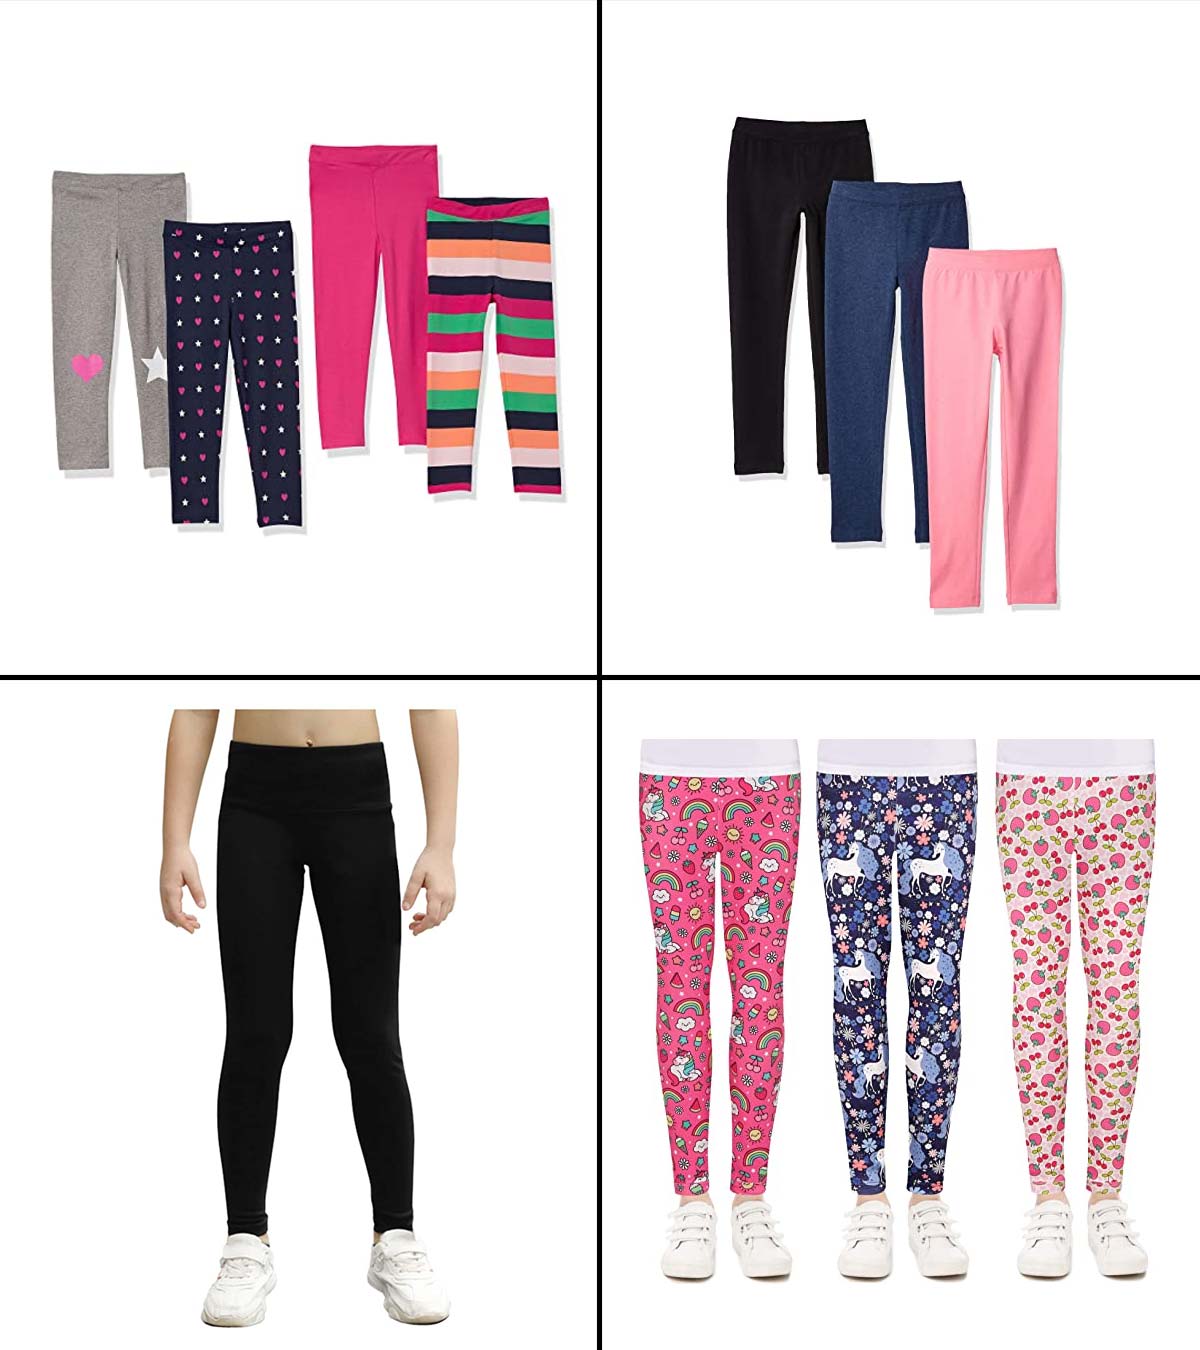 Champion Girls Heritage Stretch Active Tech Leggings with Media Pocket 